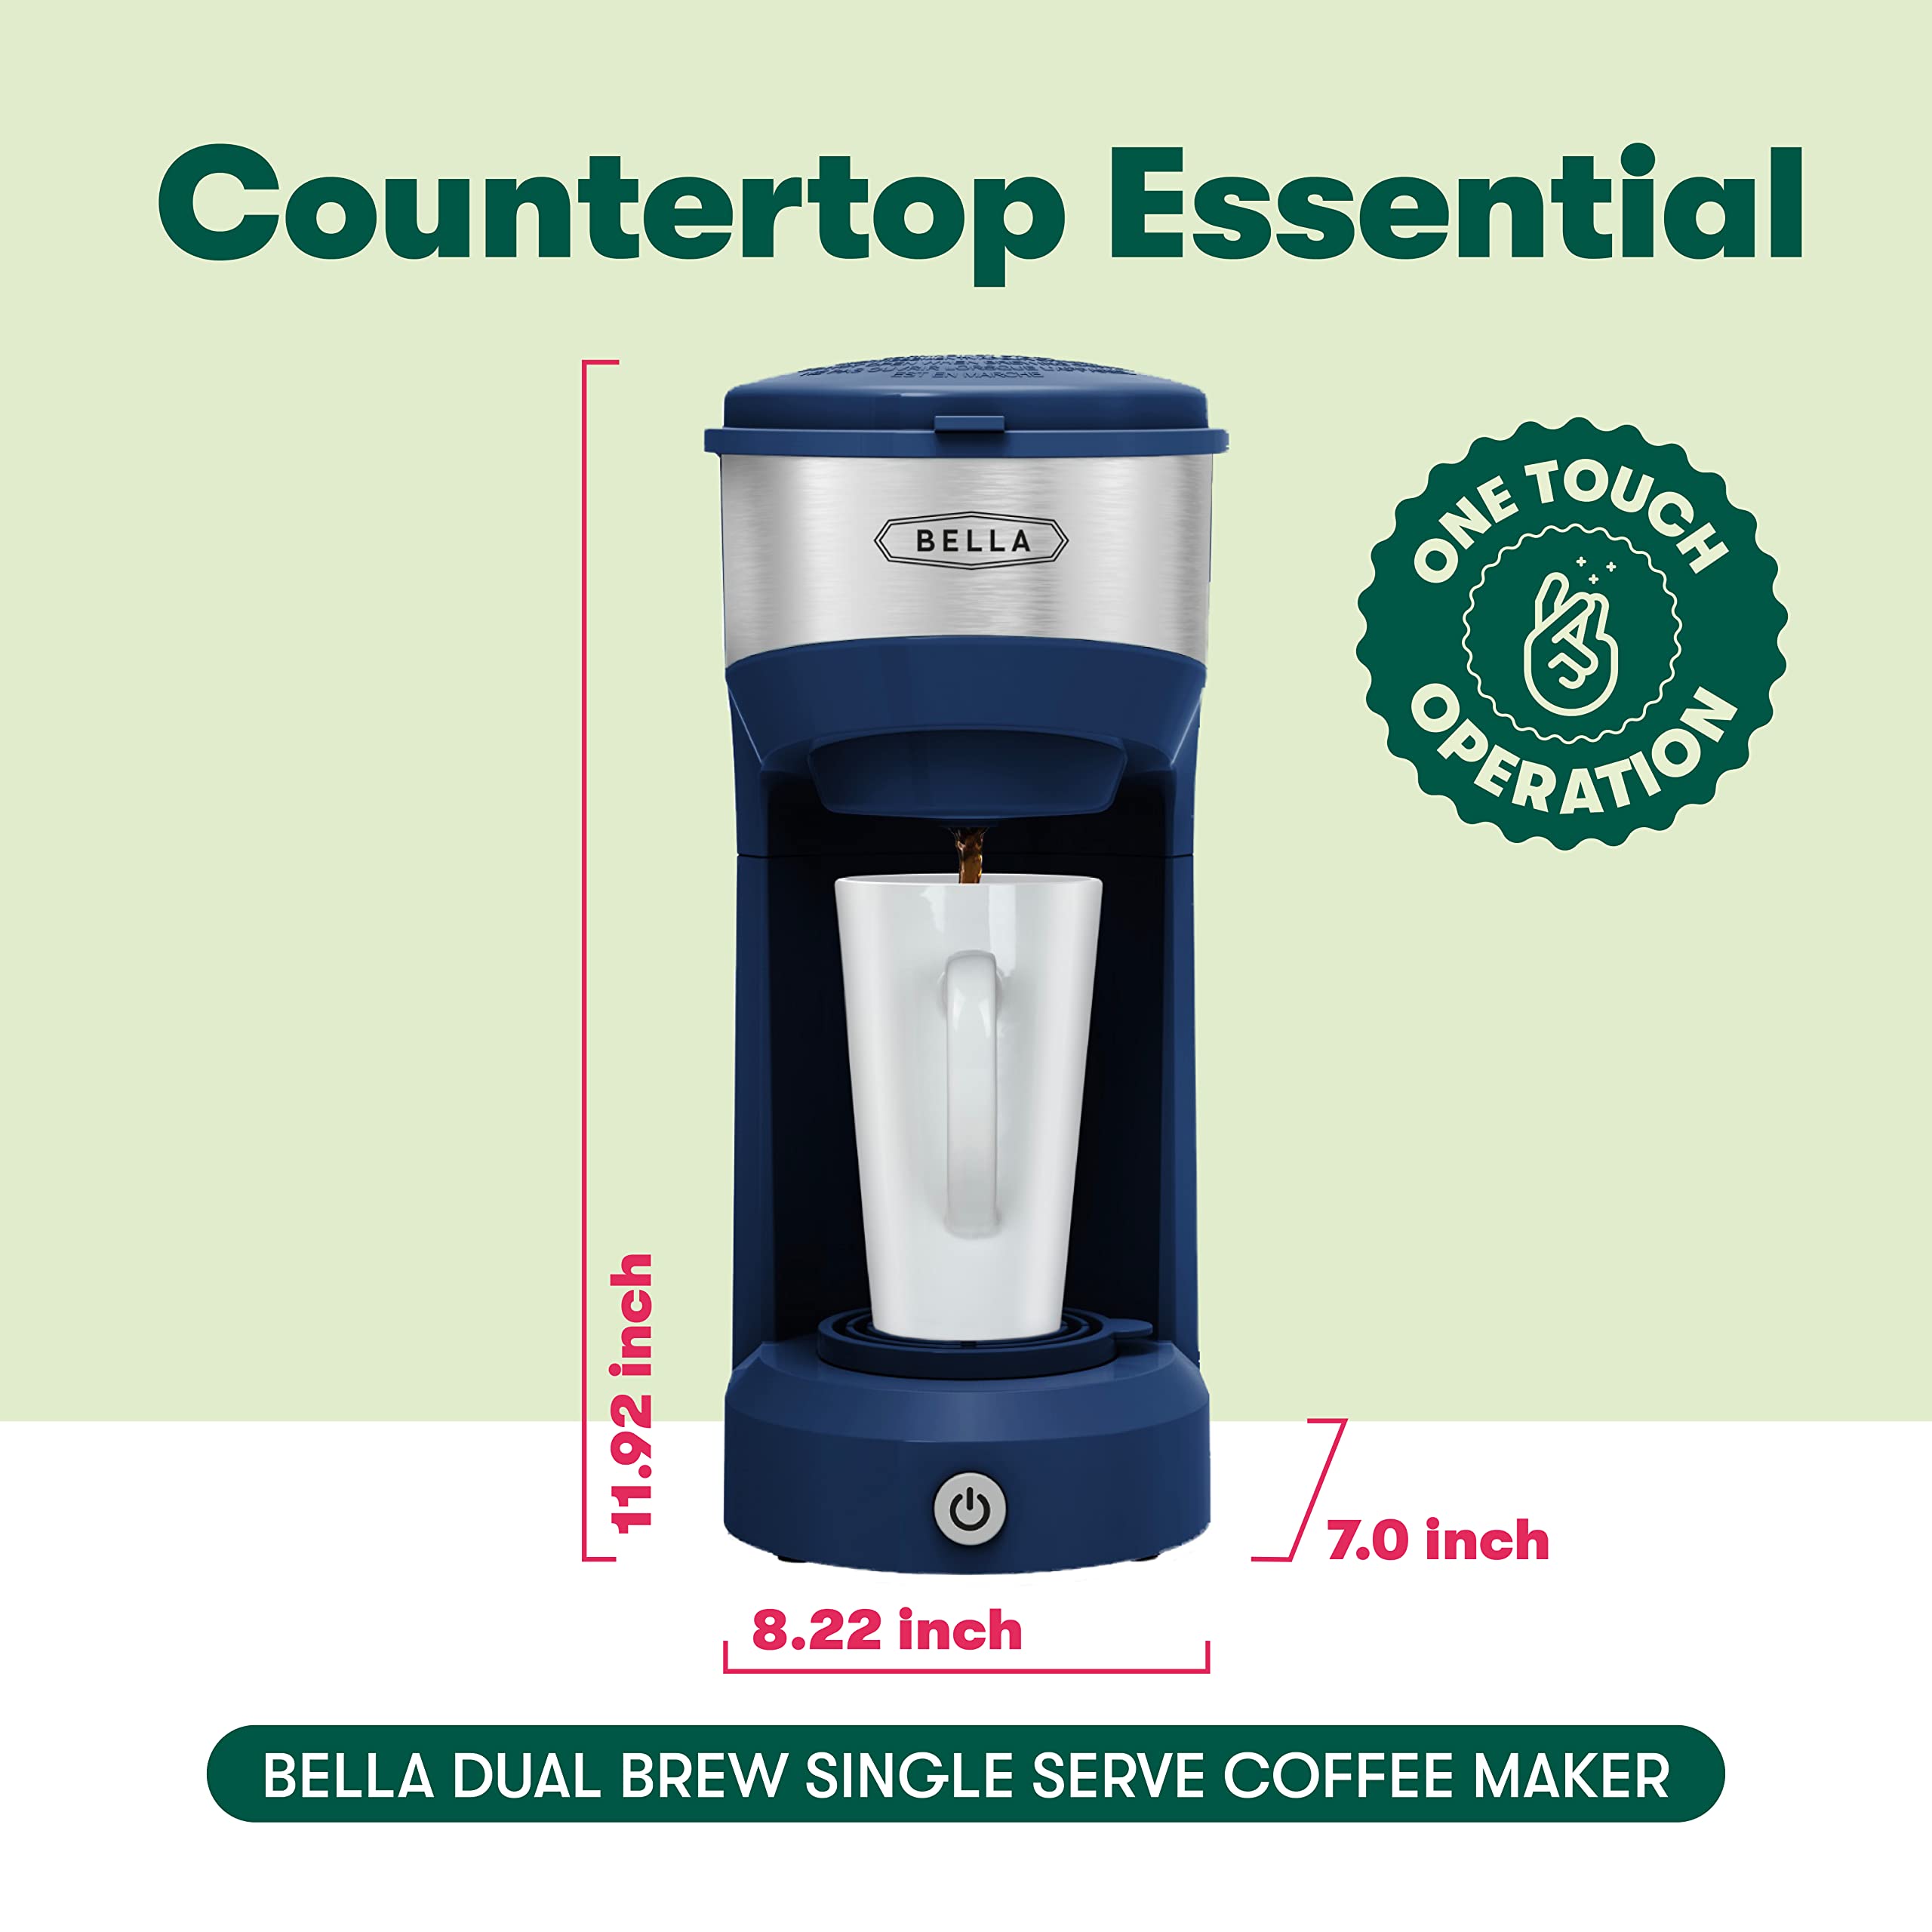 BELLA Dual Brew Single Serve Coffee Maker, K-cup Compatible with Ground Coffee Basket & Adapter - Carefree Auto Shut Off & Adjustable Tray, 14oz, Navy